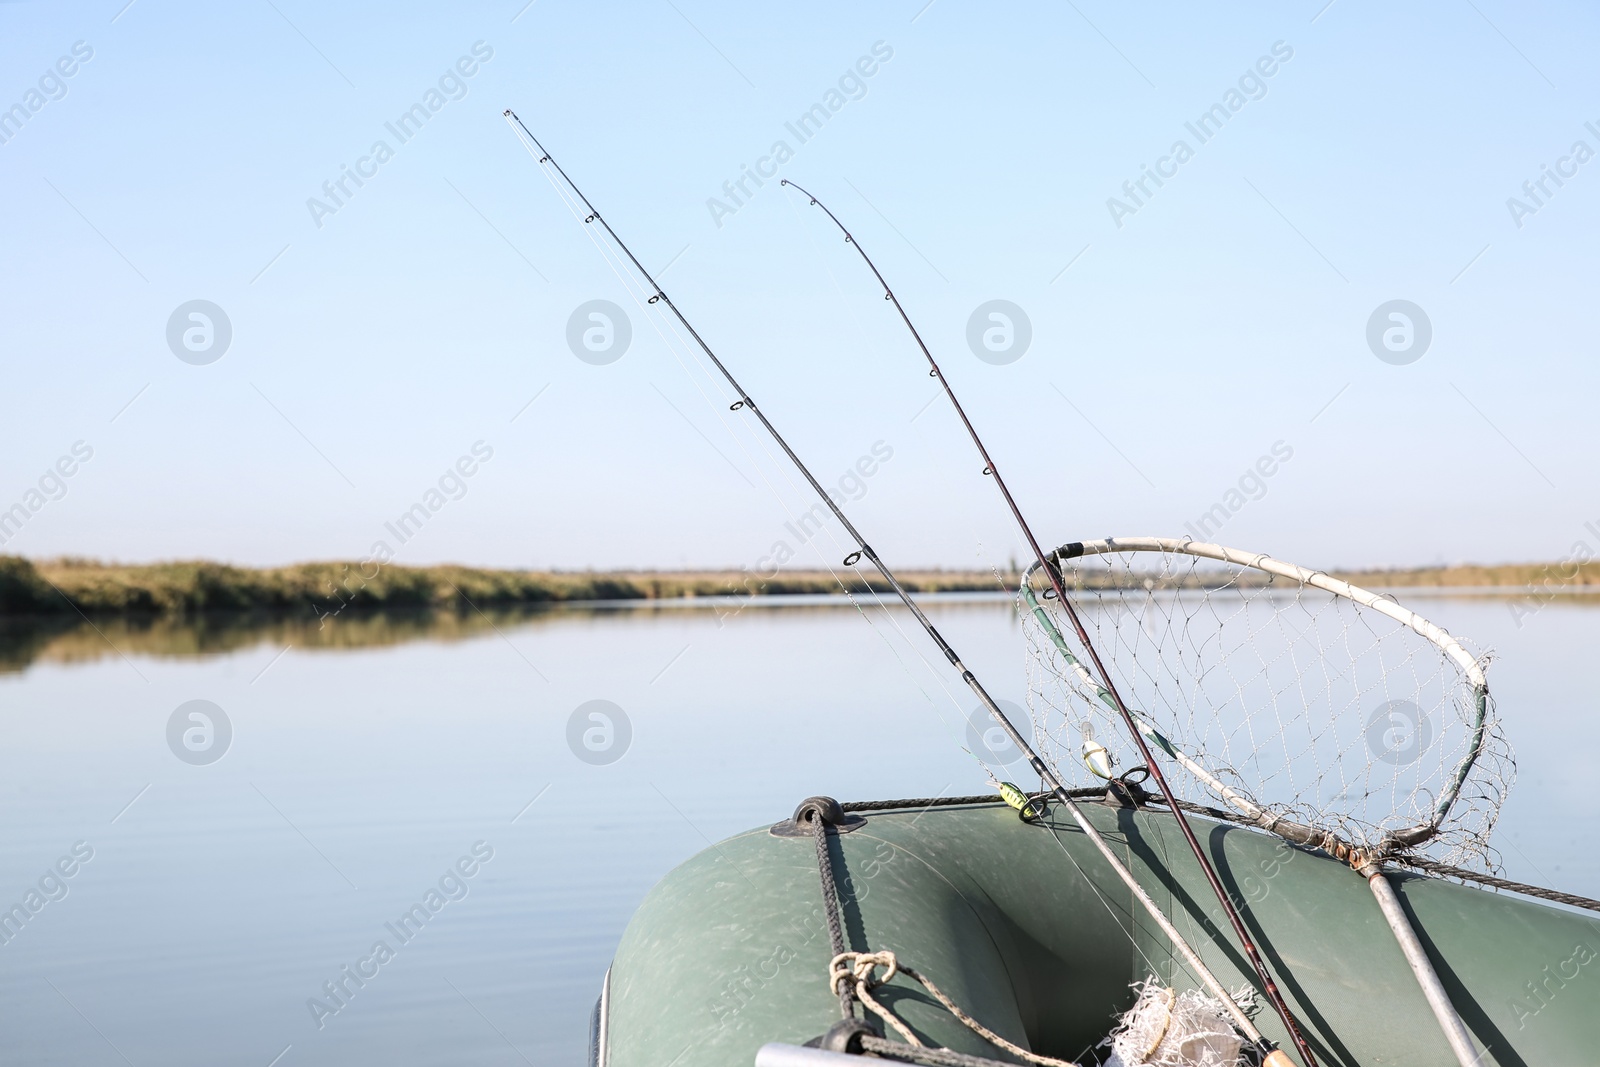 Photo of Fishing rods in inflatable boat on river